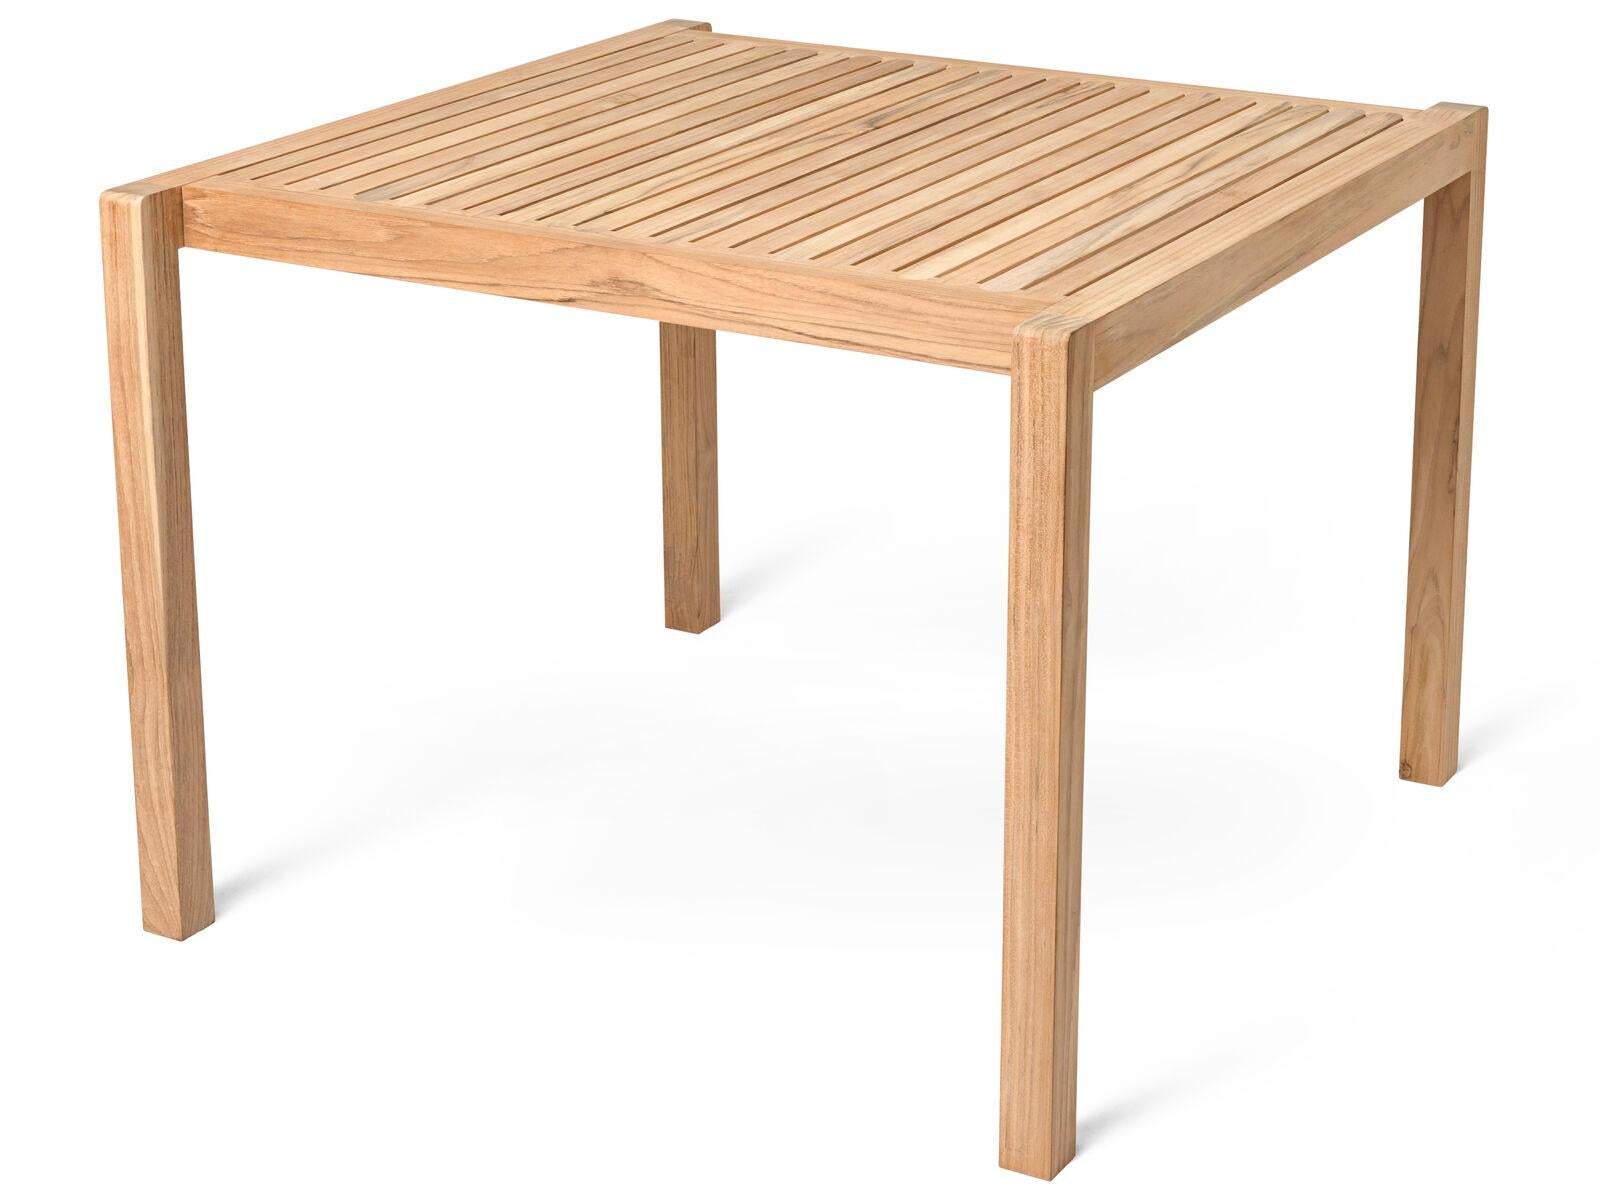 The simple, square dining table is part of the AH Outdoor series, designed by Alfred Homann in 2022. Like the rest of the series, the table is designed with a strict aesthetic that is elegantly combined with soft, rounded details. The table can be